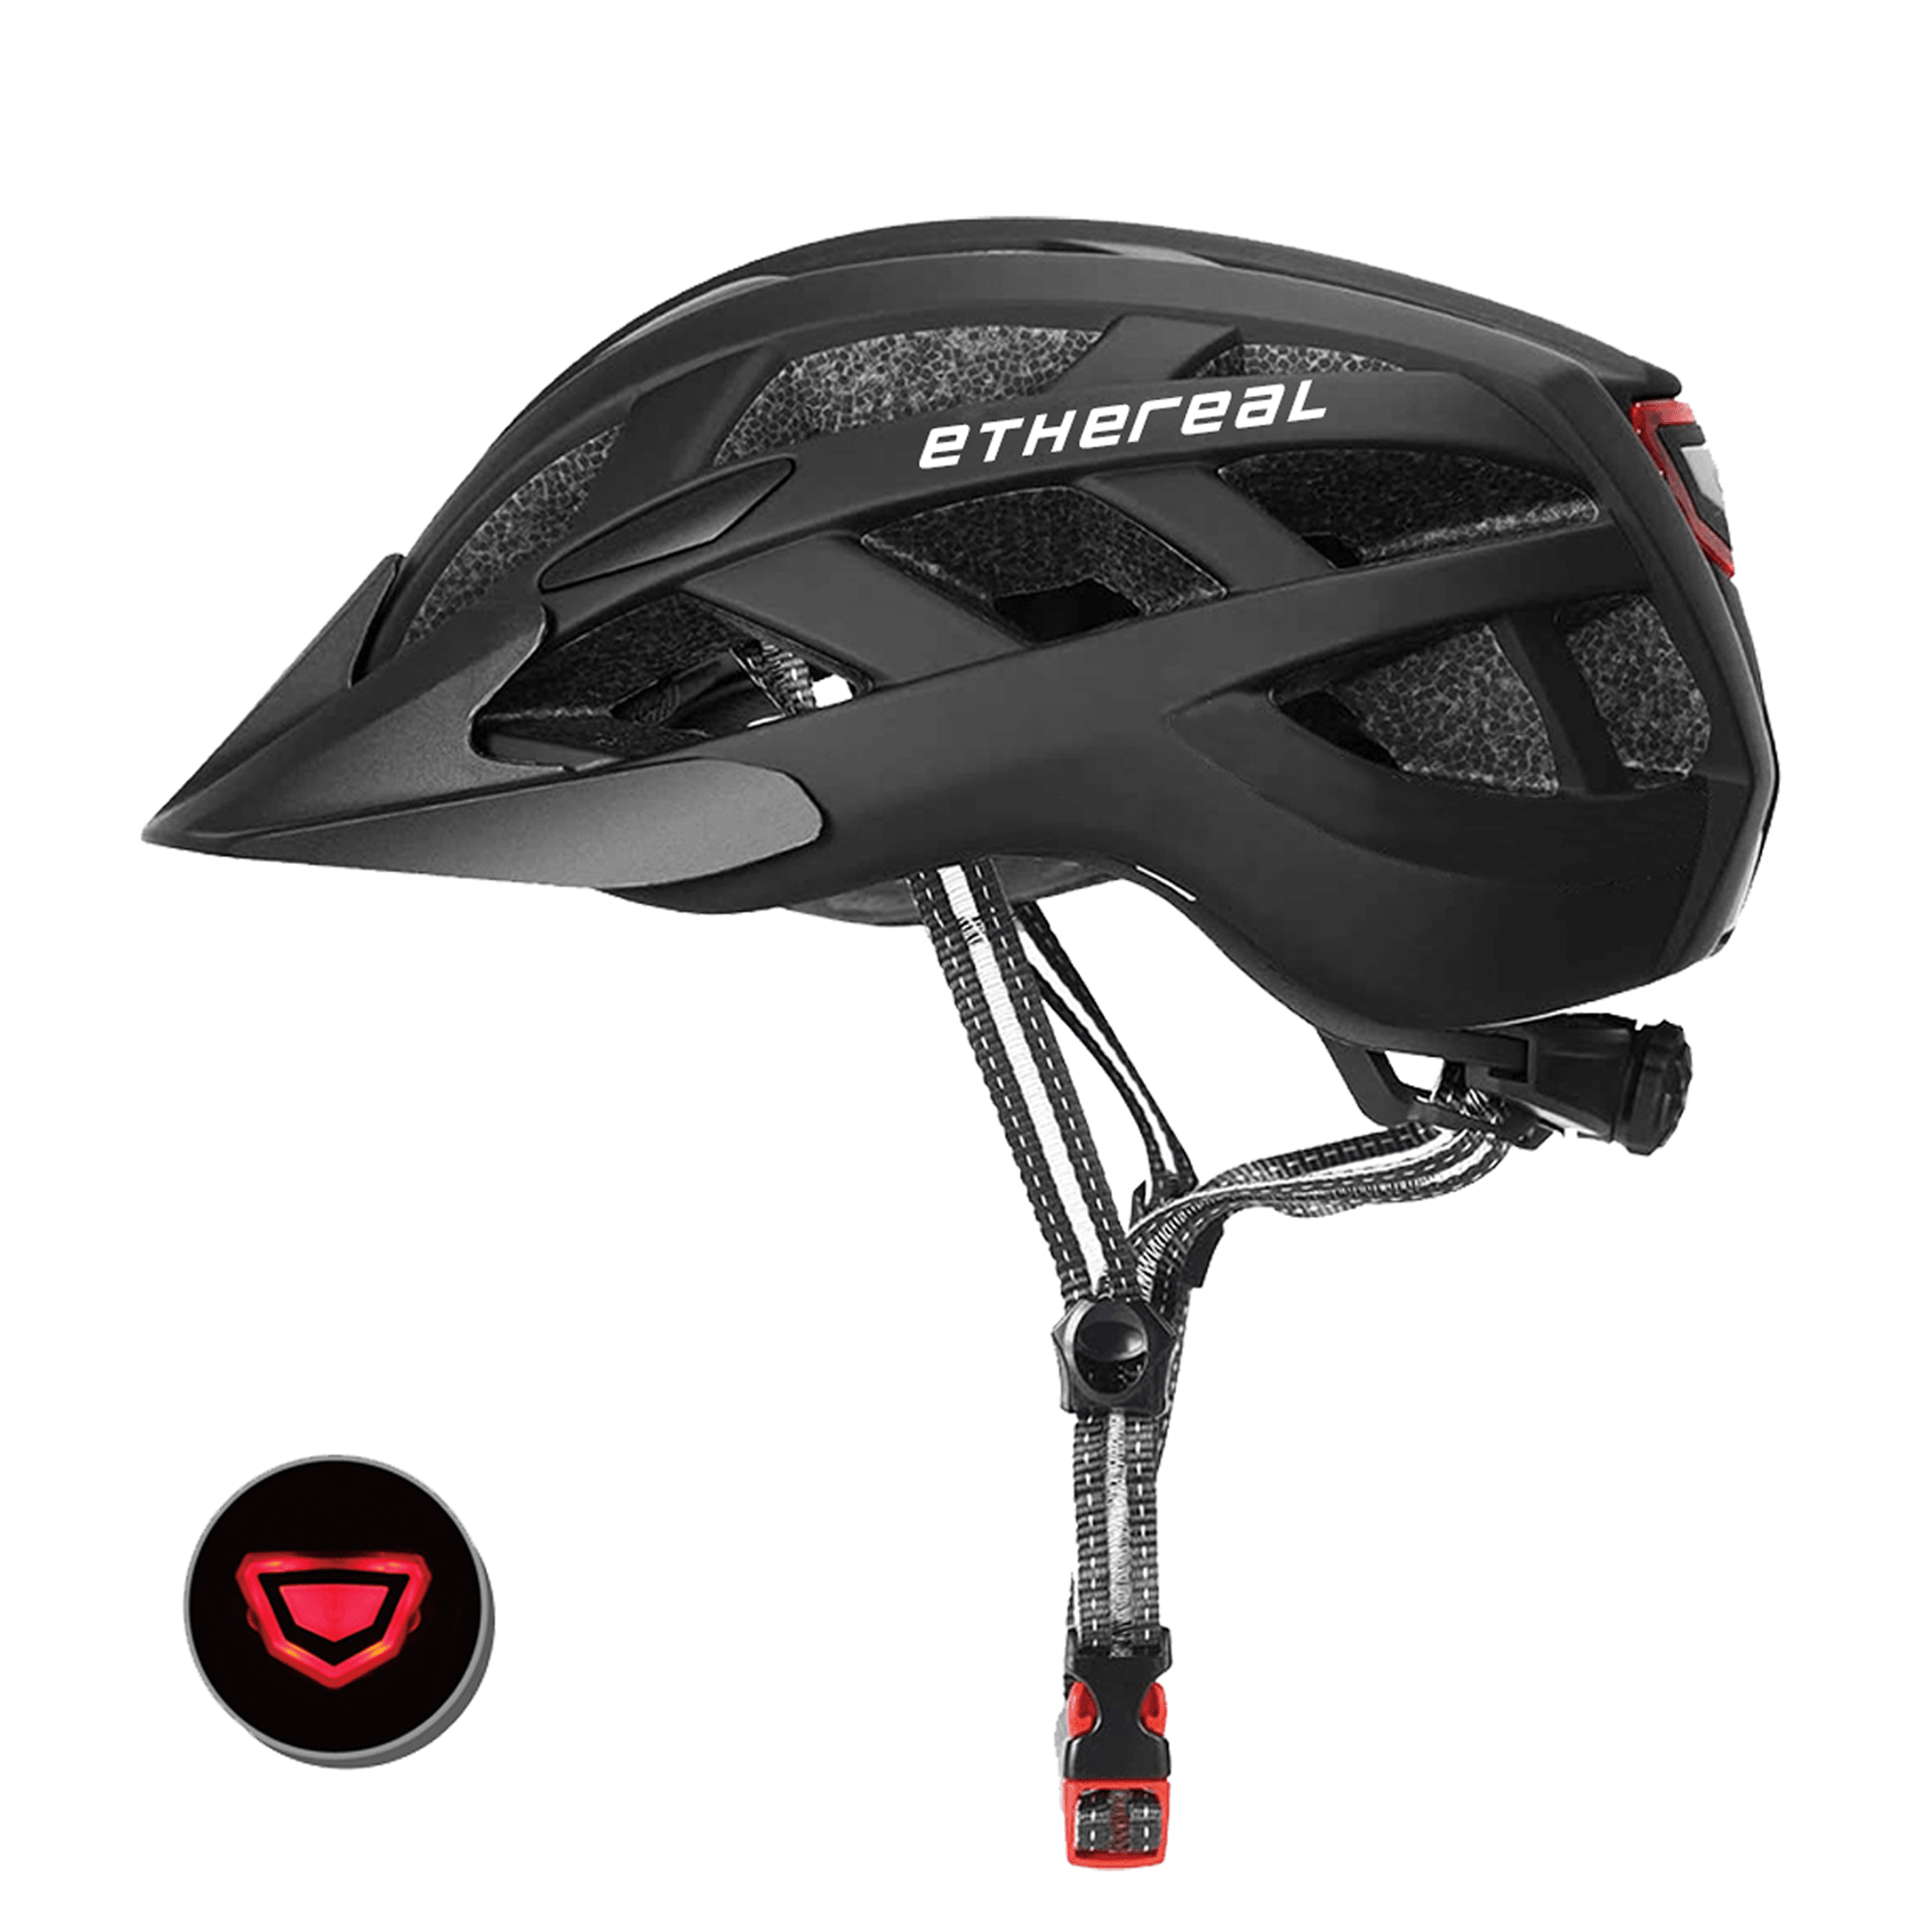 Stay safe and stylish with the Ethereal Helmet. Certified to European EN1078 and United States CPSC Safety Standard. Includes rechargeable in-built rear LED light. 1-to-1 exchange policy and 1-year warranty- The Bike Atrium - Best Bicycle Shop in Singapore